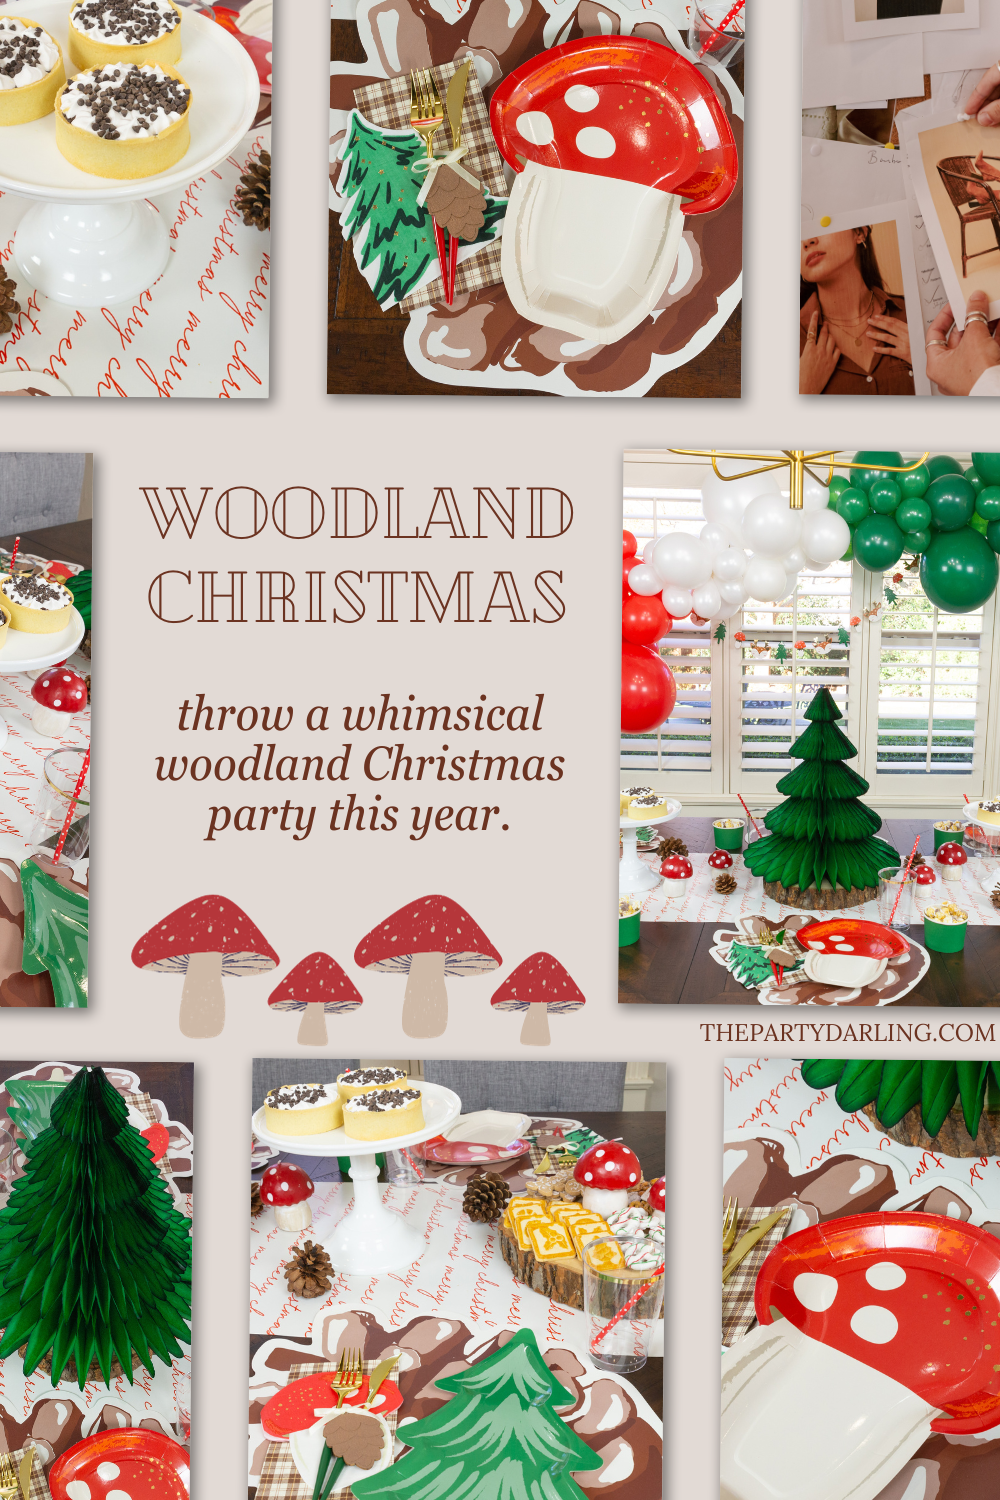 Throw a Whimsical Christmas Party | The Party Darling